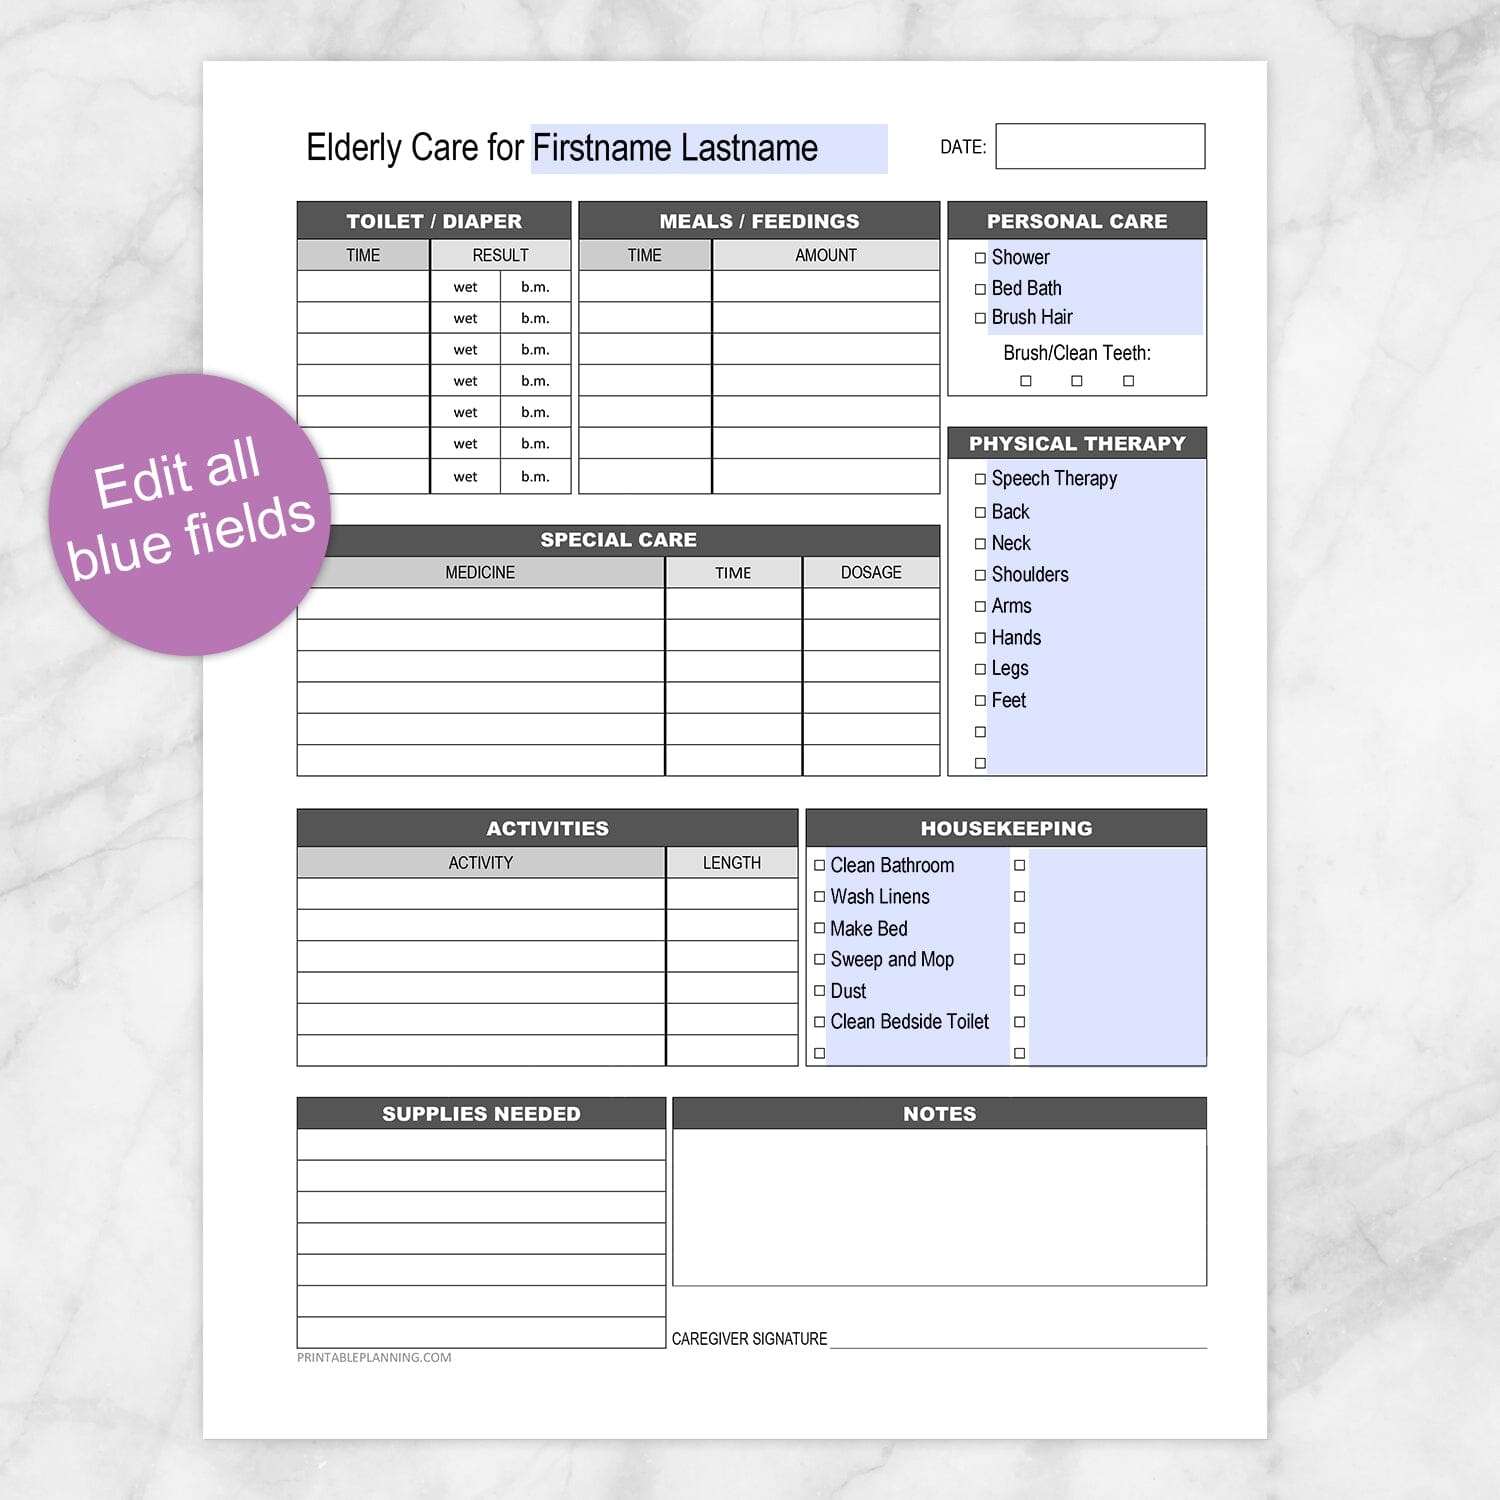 Printable Elderly Care, Daily Care Sheet with Housekeeping at Printable Planning. Edit all blue fields in a PDF app.